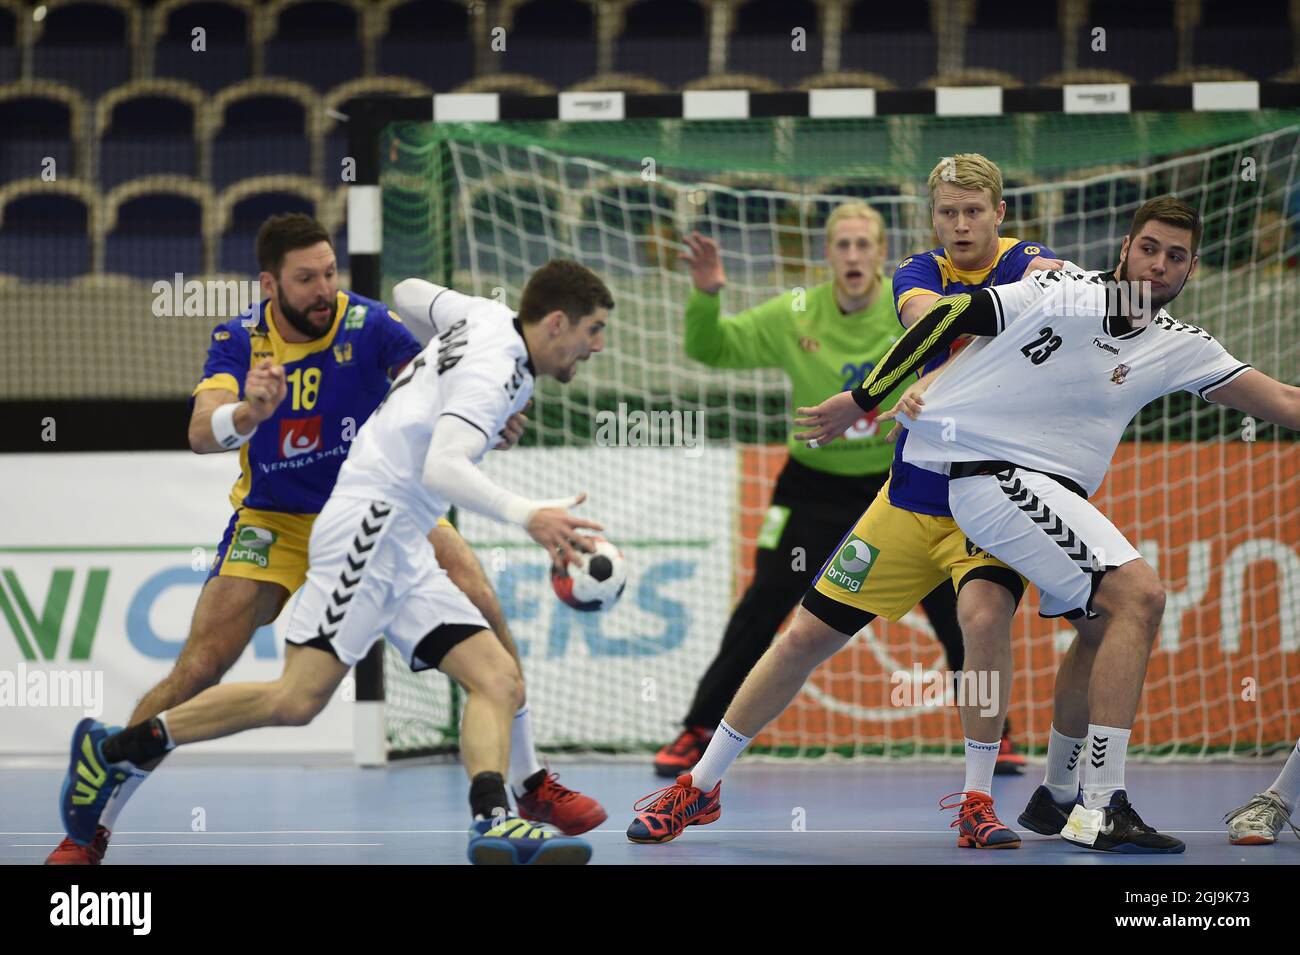 MALMO 20160105 Czech Ondrej Zdrahala, left, and Leos Petrovsky fight with Sweden's Tobias Karlsson (18) and an unidetified player during the friendly handball match between Sweden and Czech Republic in Malmo, Sweden, on Jan. 05, 2016. Photo: Bjorn Lindgren / TT / code 9204  Stock Photo